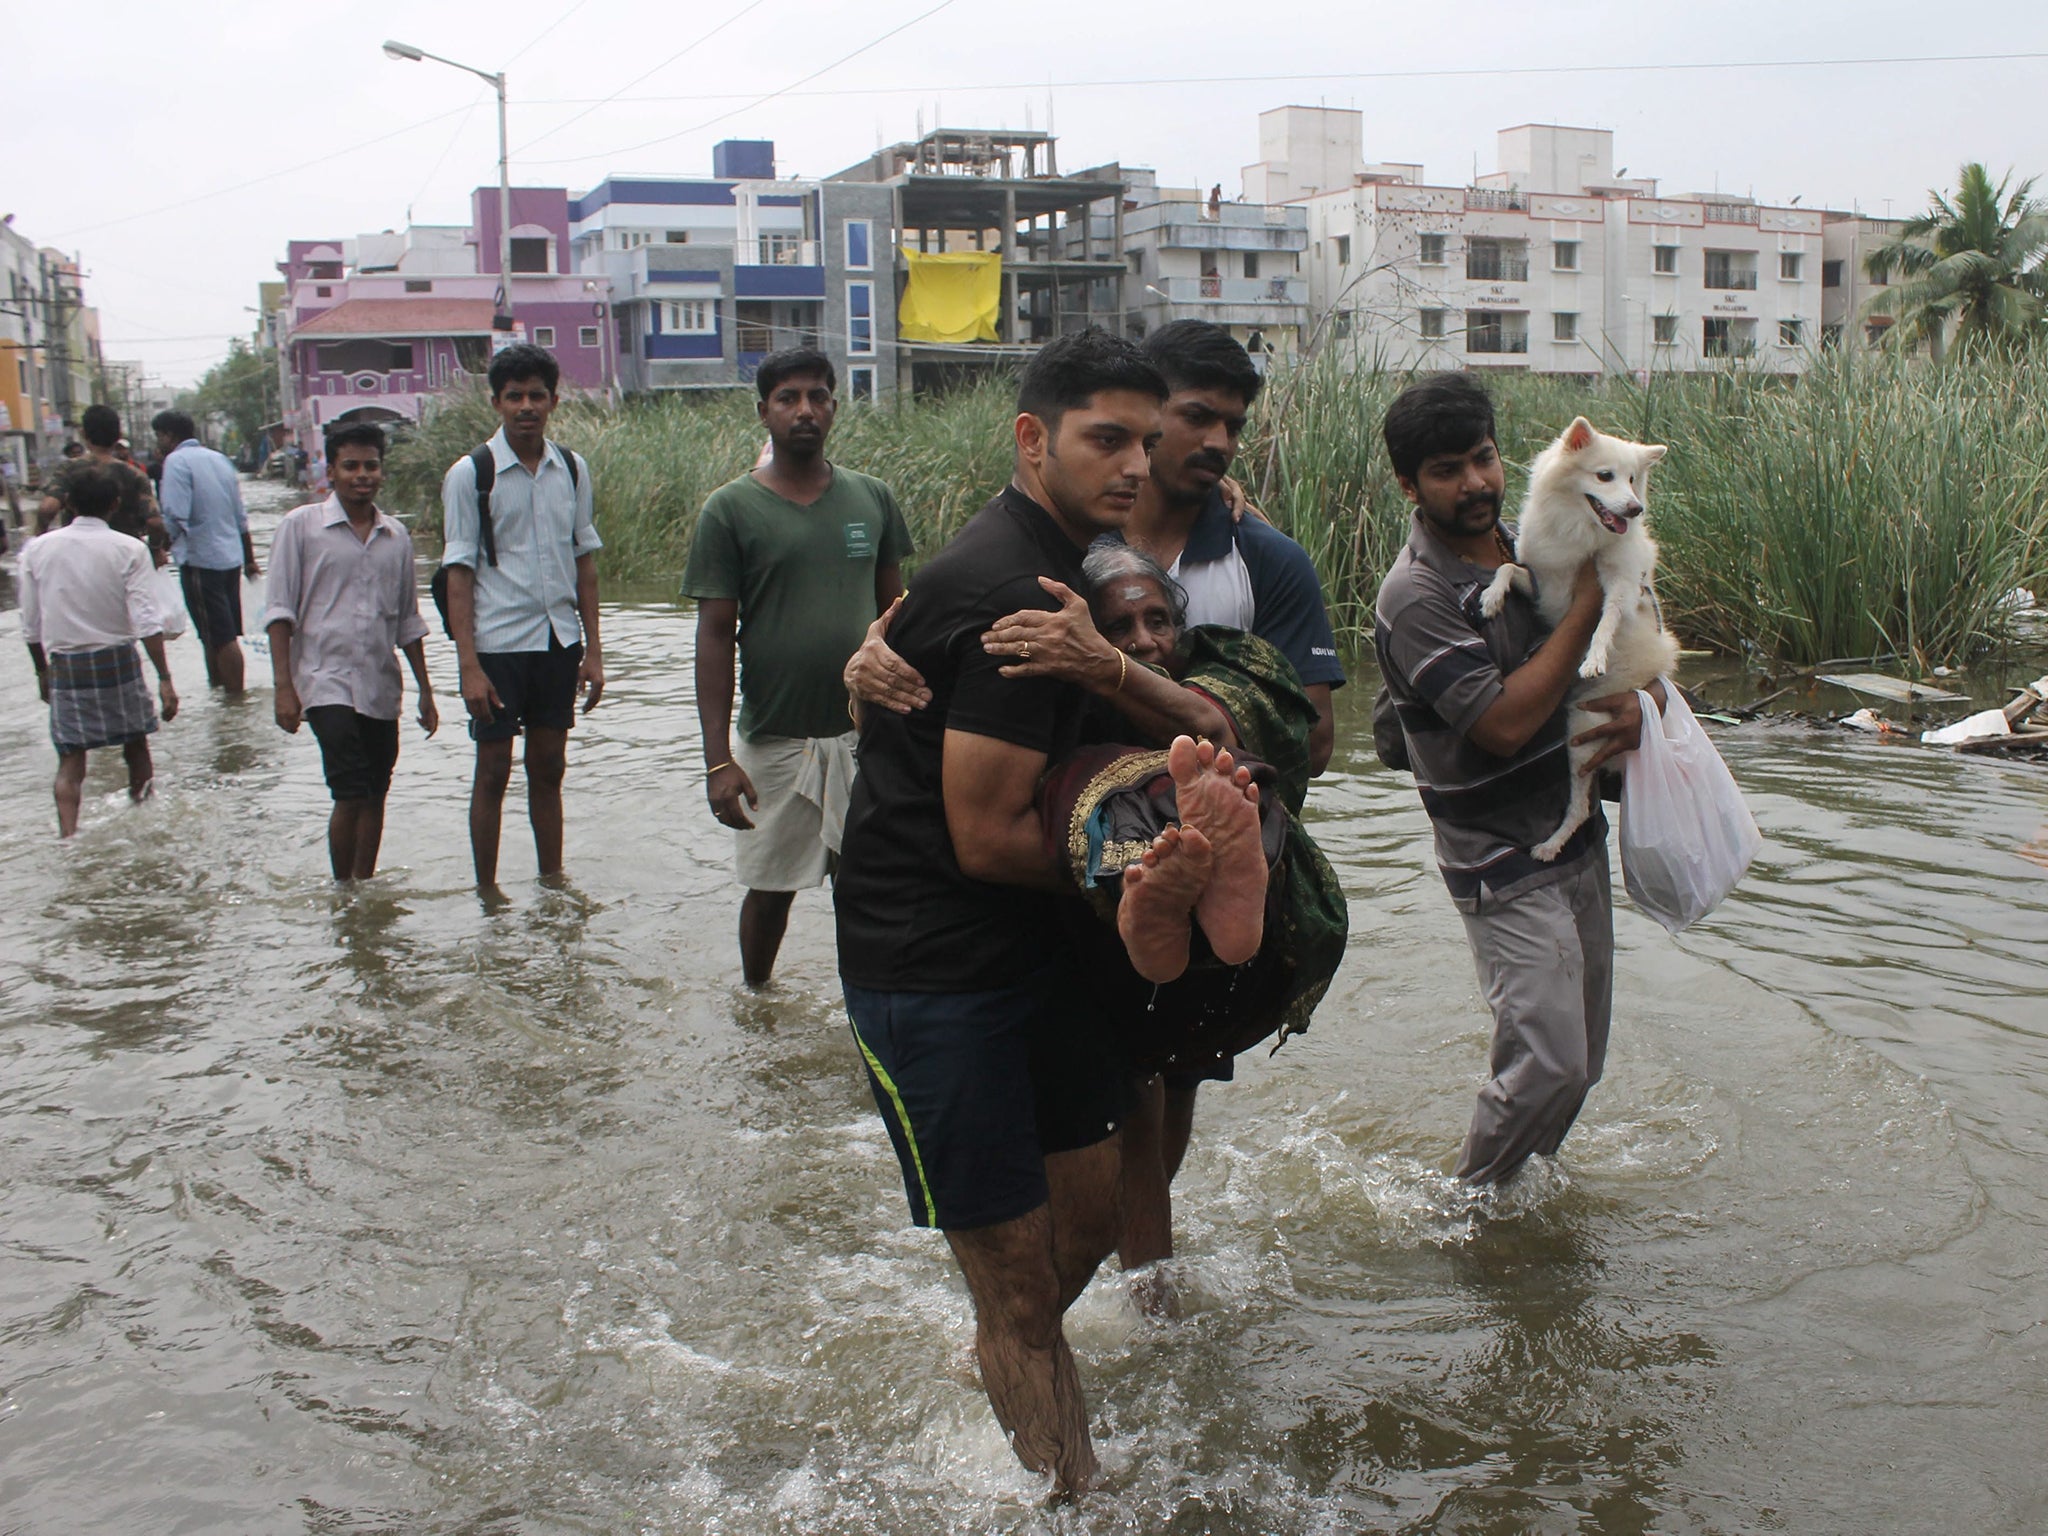 Chennai Floods Rains Ease To Boost Rescue Hopes As Death Toll From Disaster Approaches 300